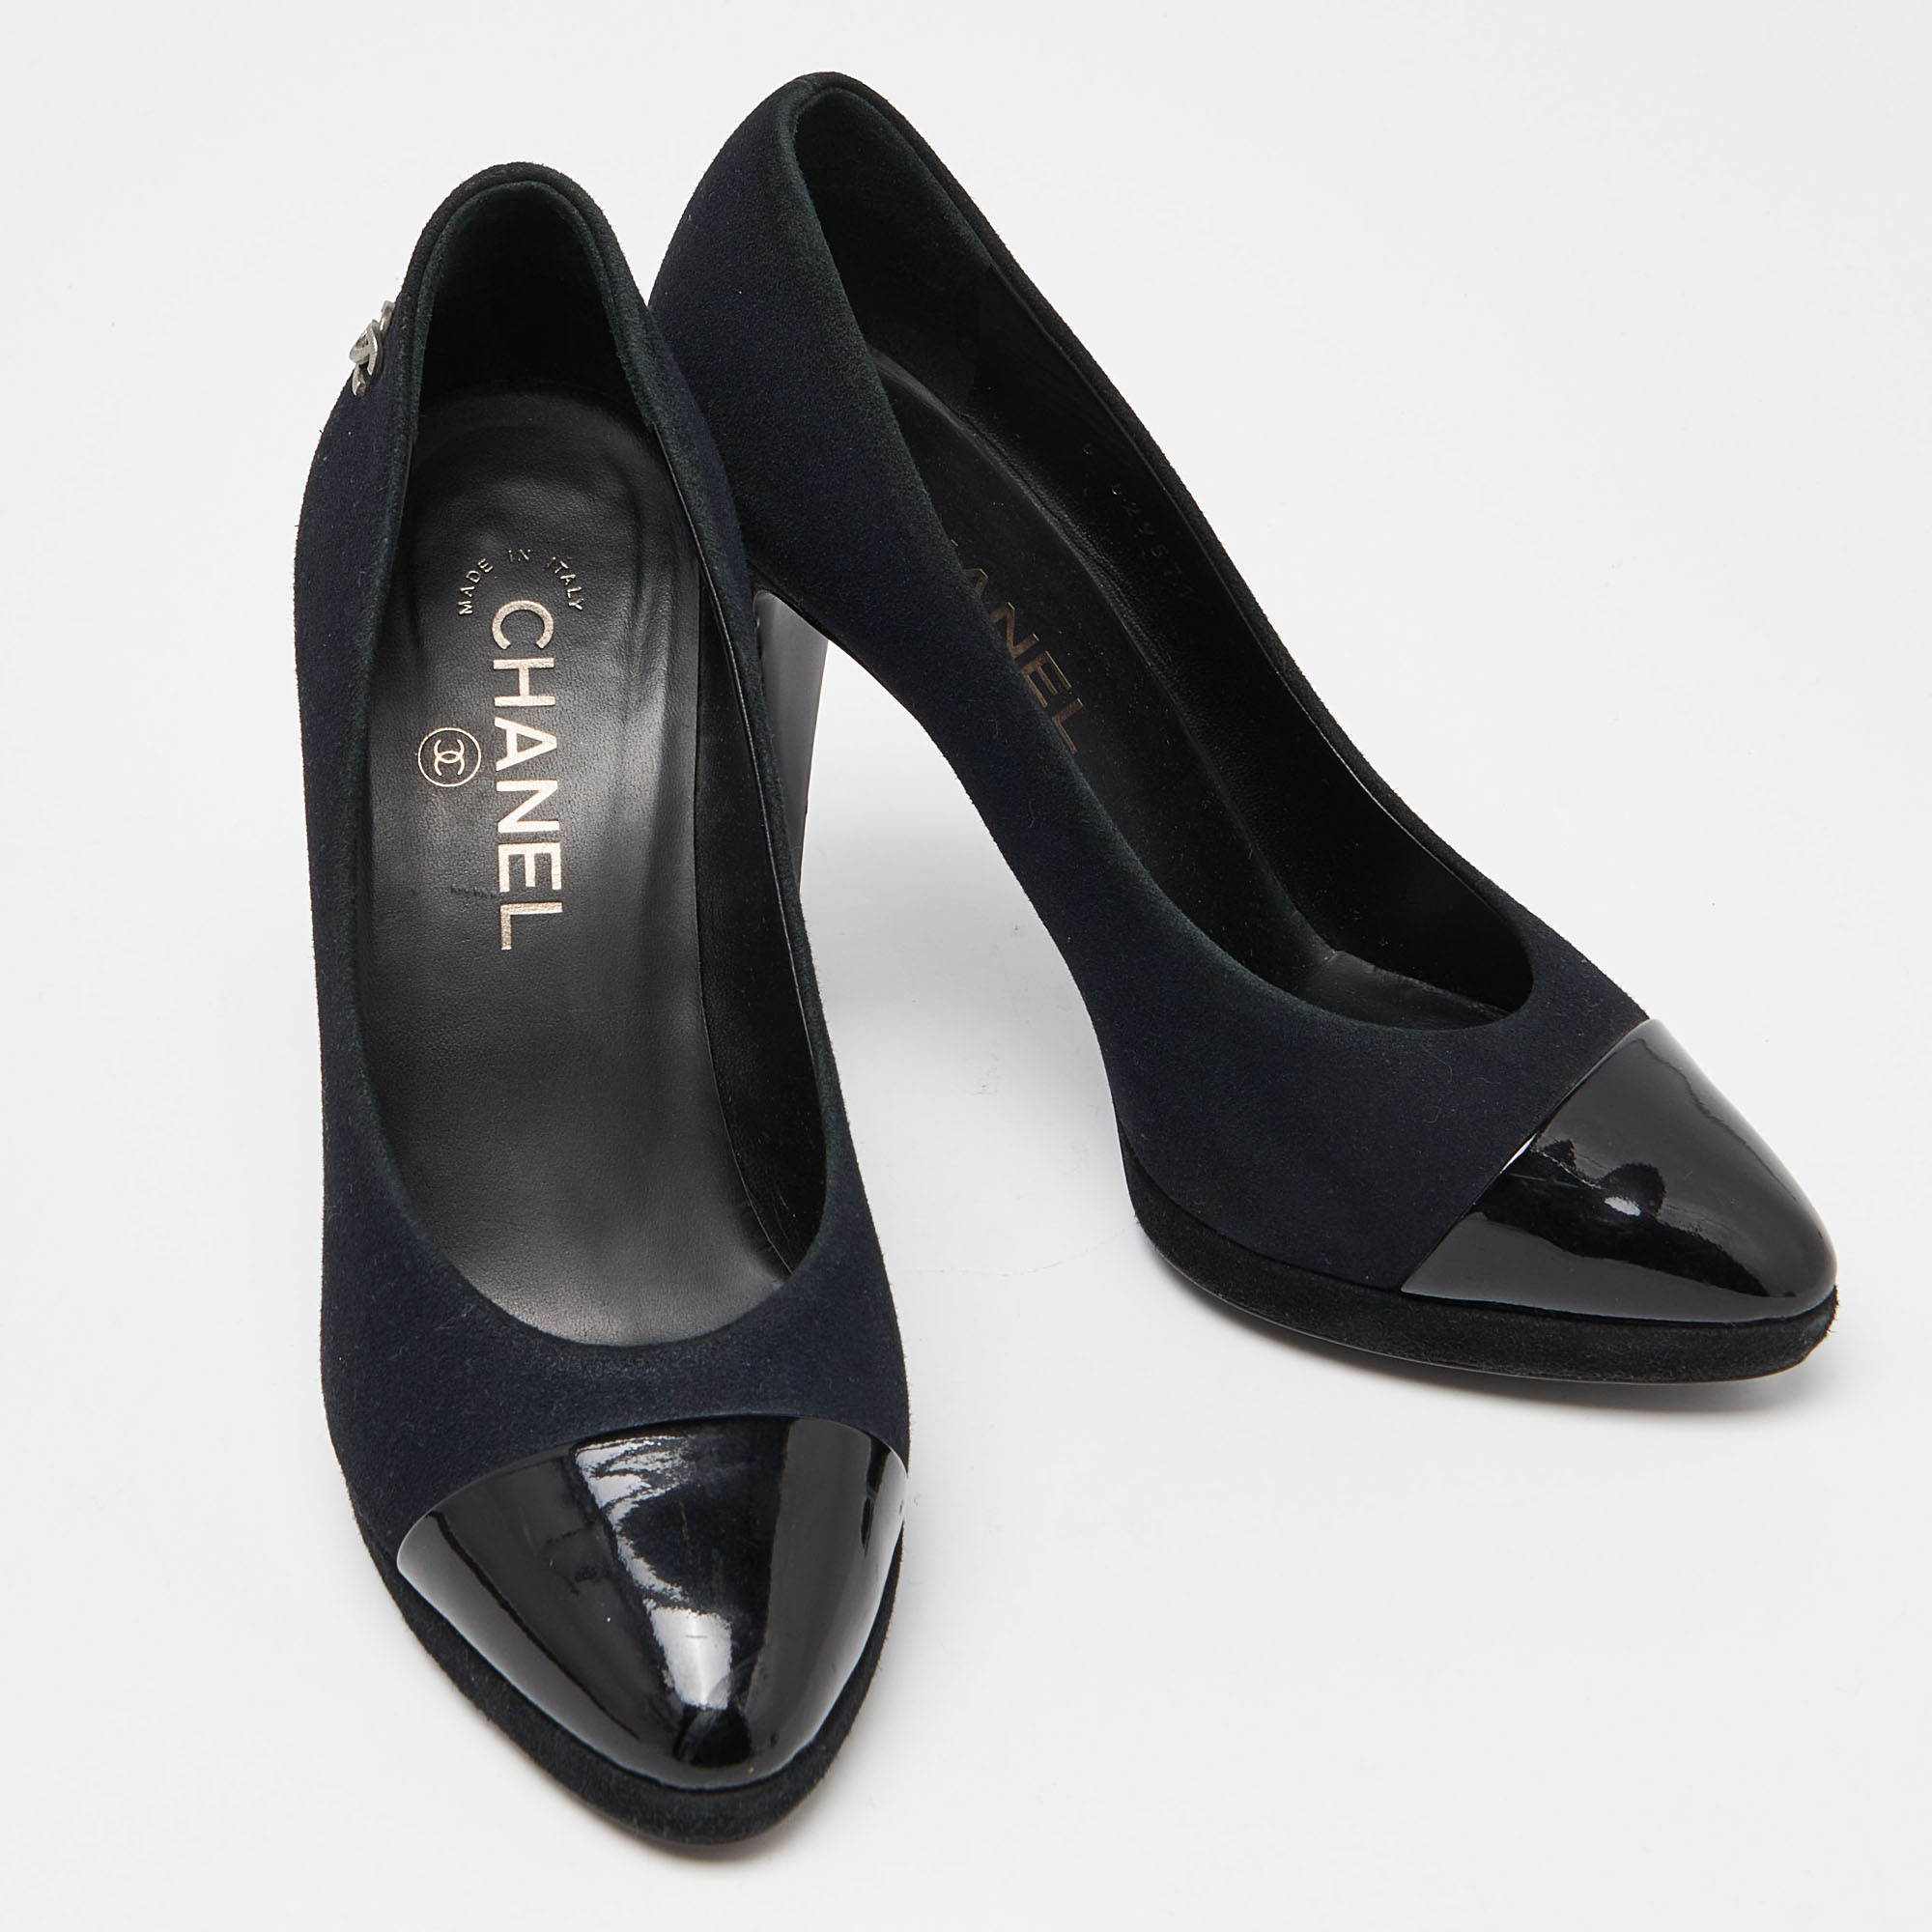 Chanel Black Fabric And Patent Leather Cap Toe CC Pumps Size 38